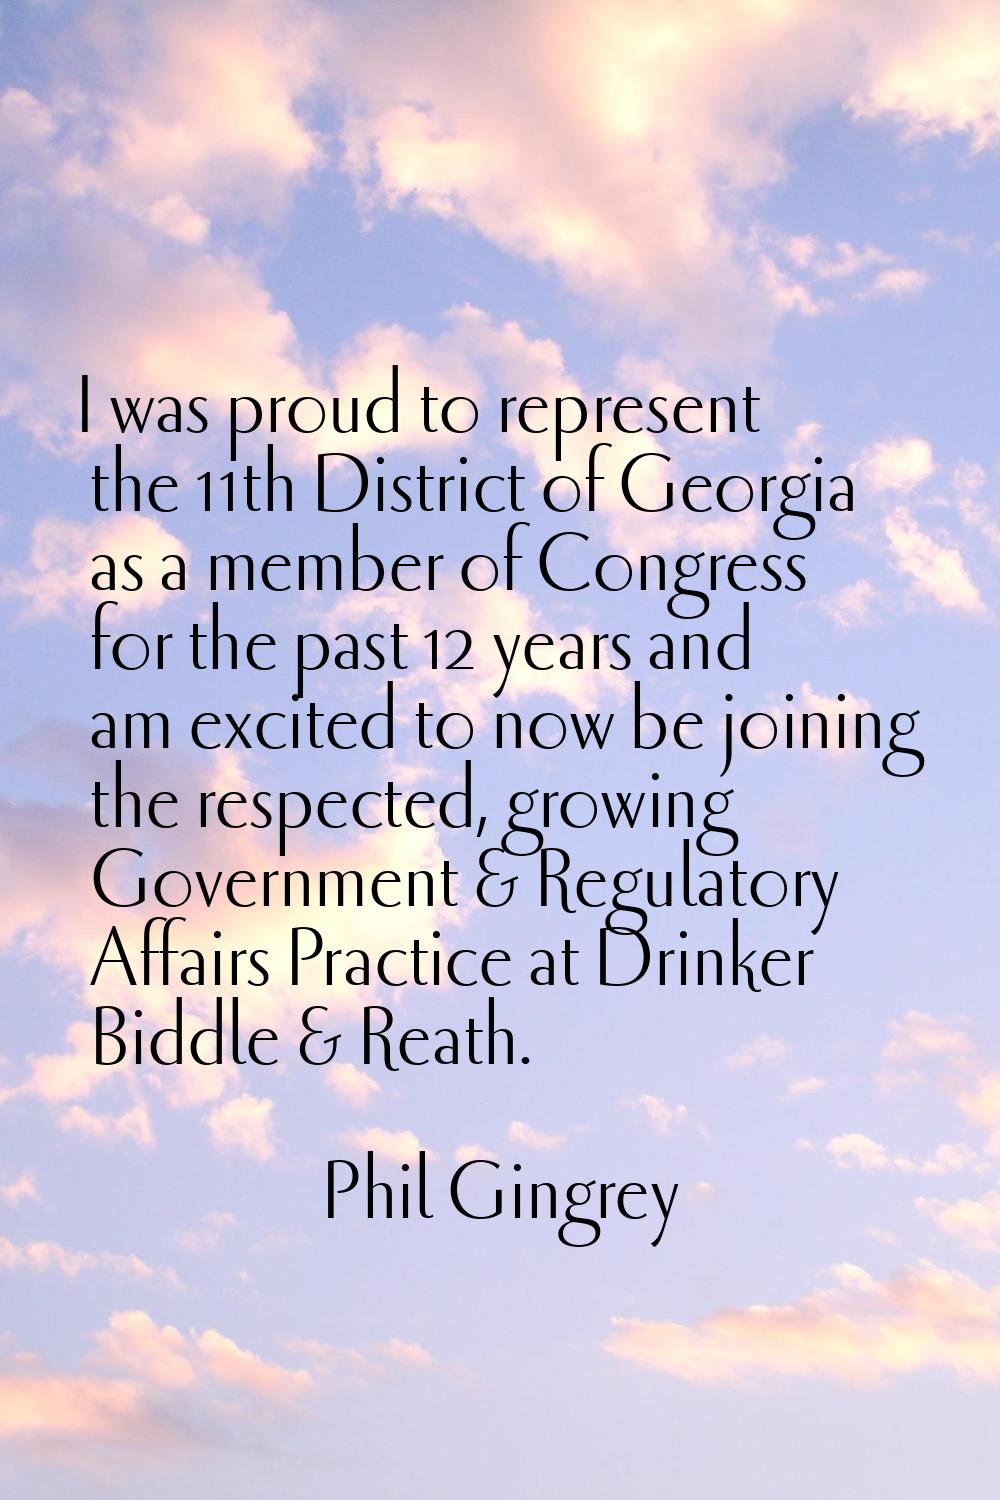 I was proud to represent the 11th District of Georgia as a member of Congress for the past 12 years